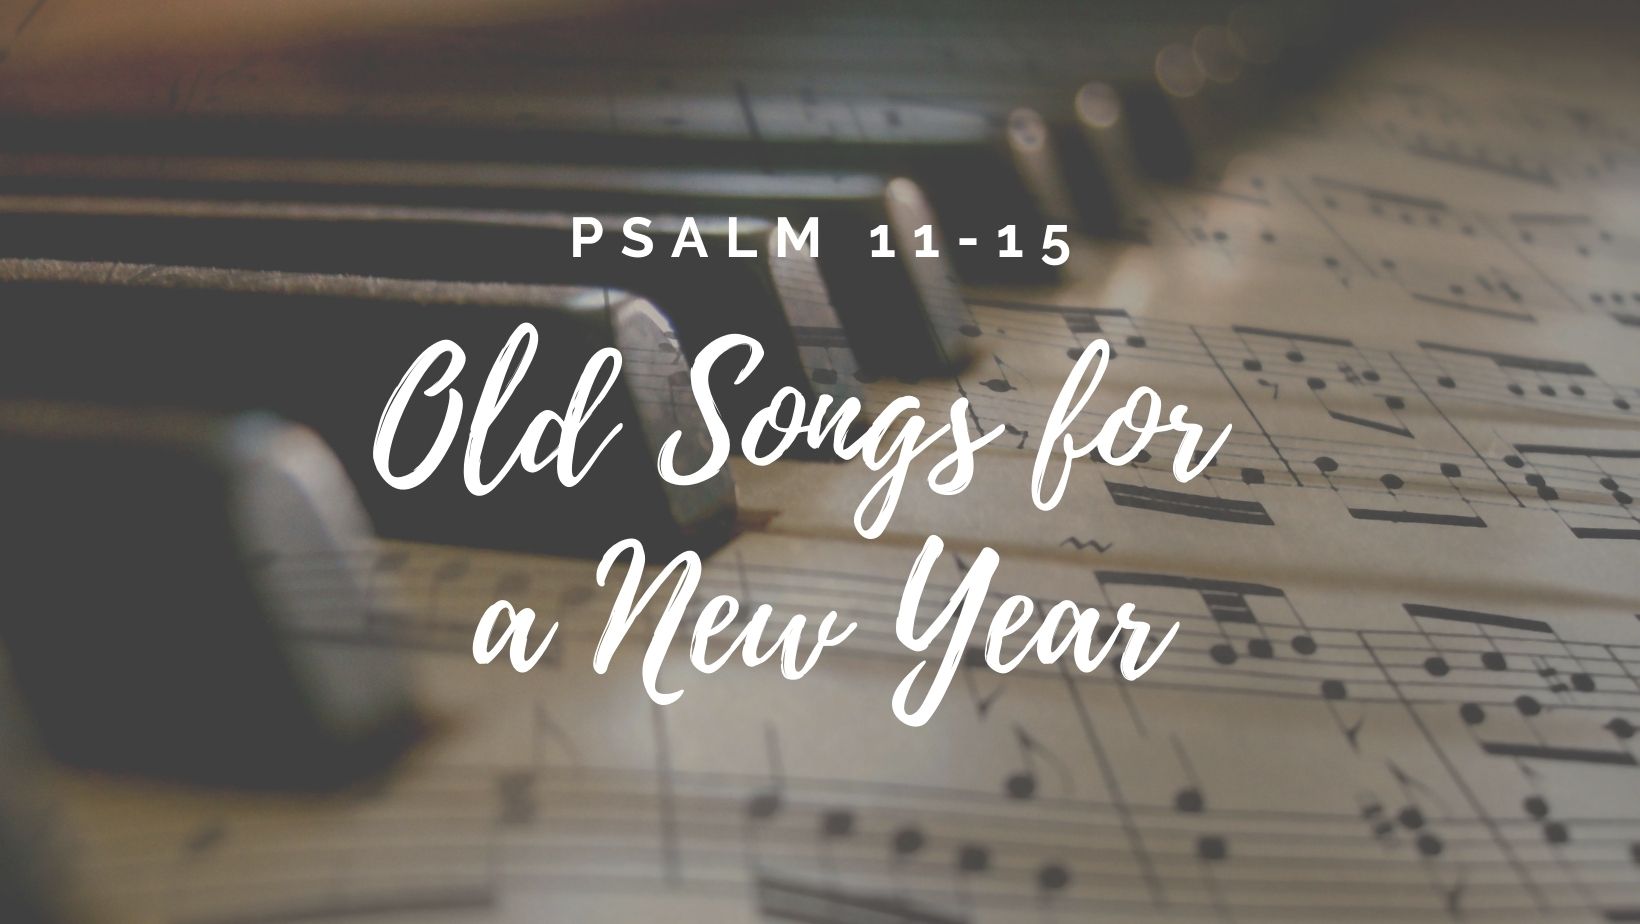 Old Songs for a New Year: Psalm 11-15 banner